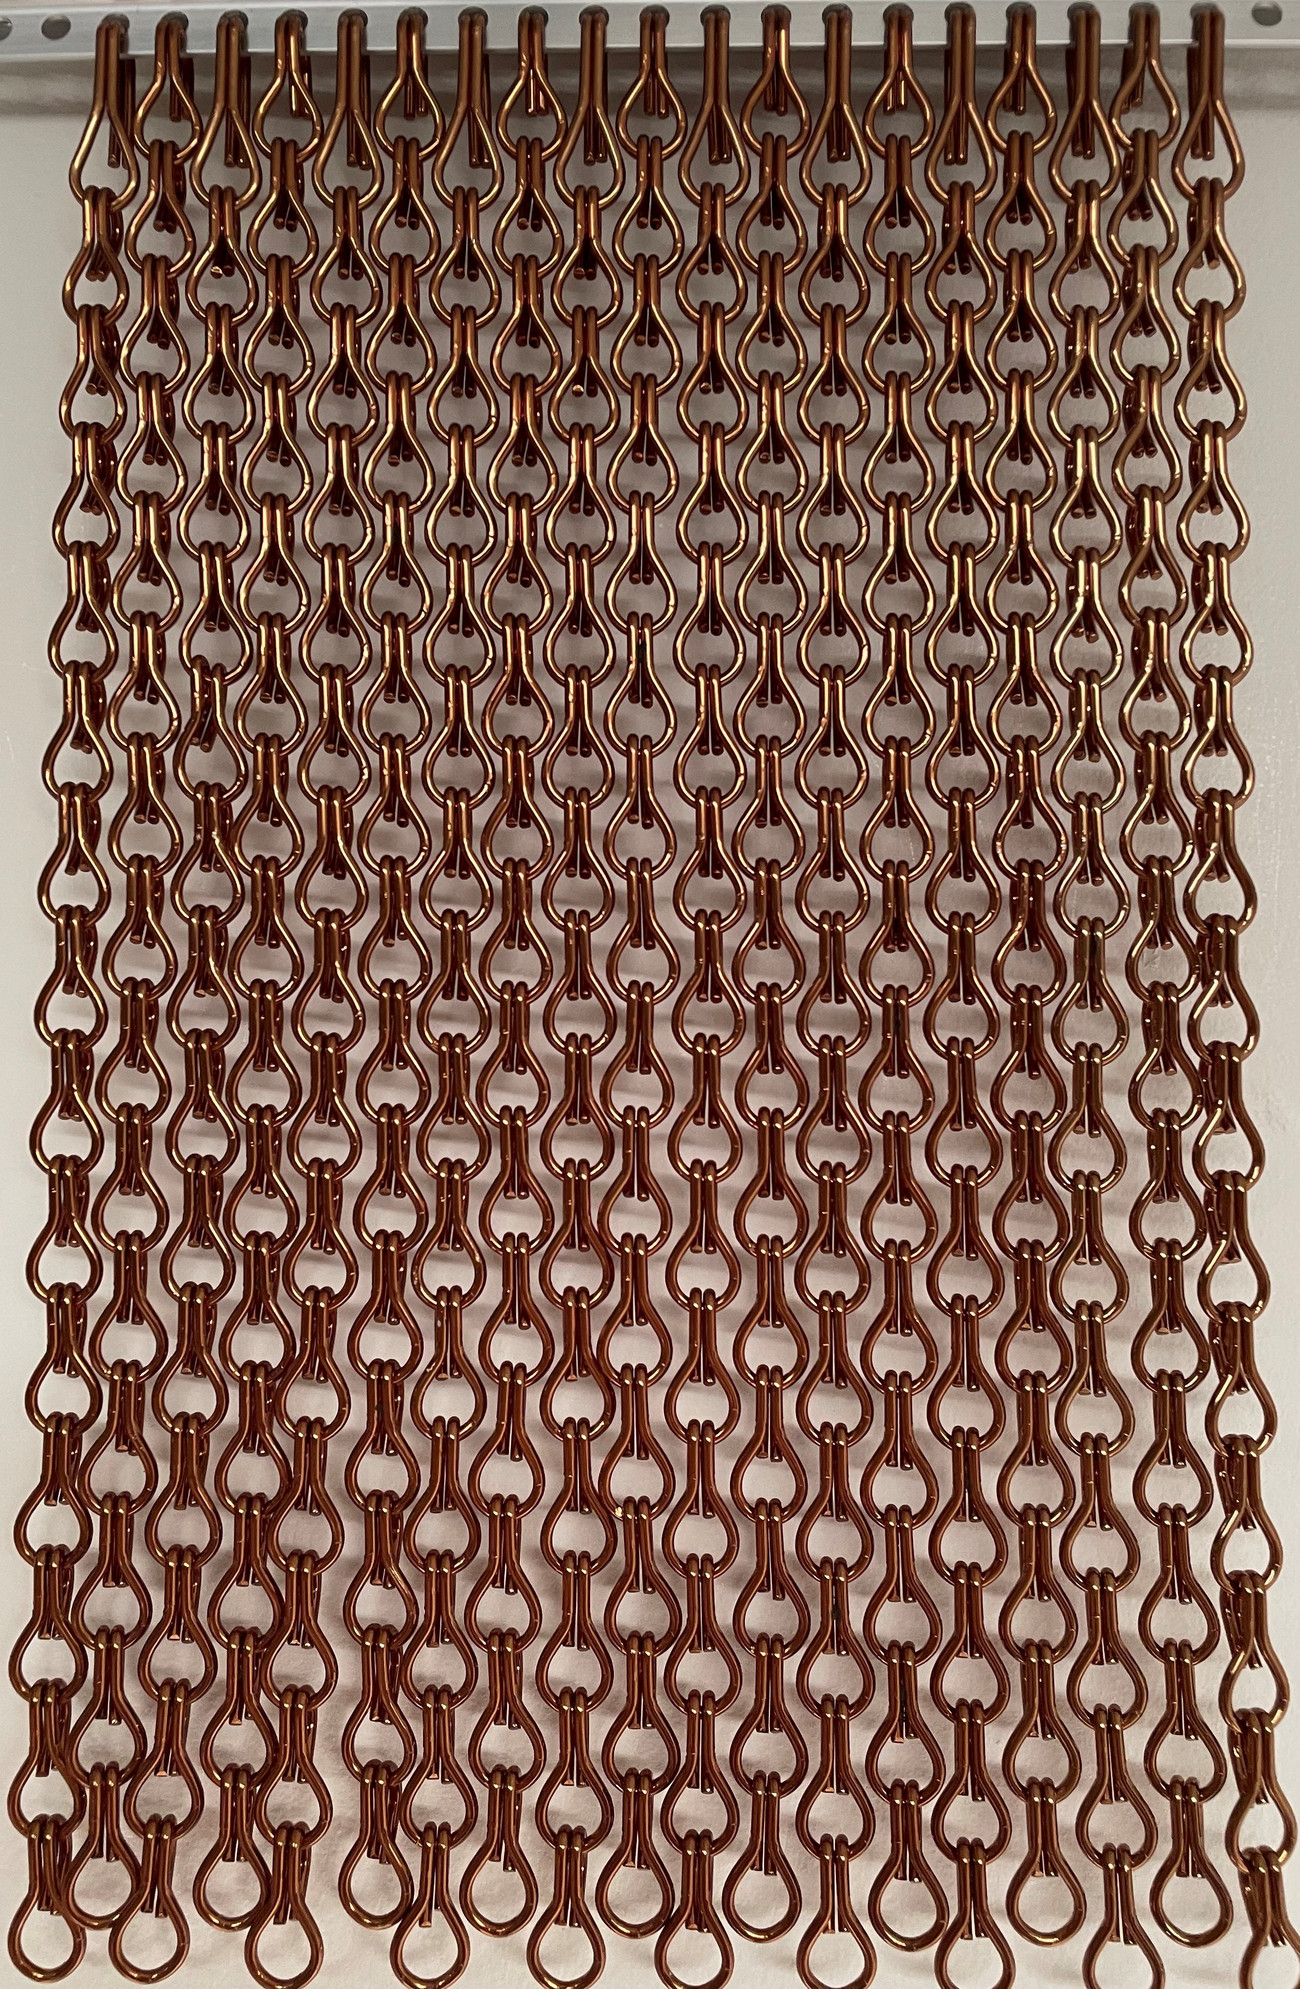 Bronze Close Knit. The pattern on the screen is made due the density of the screen being 22% more than a standard chain screen offering more protection.